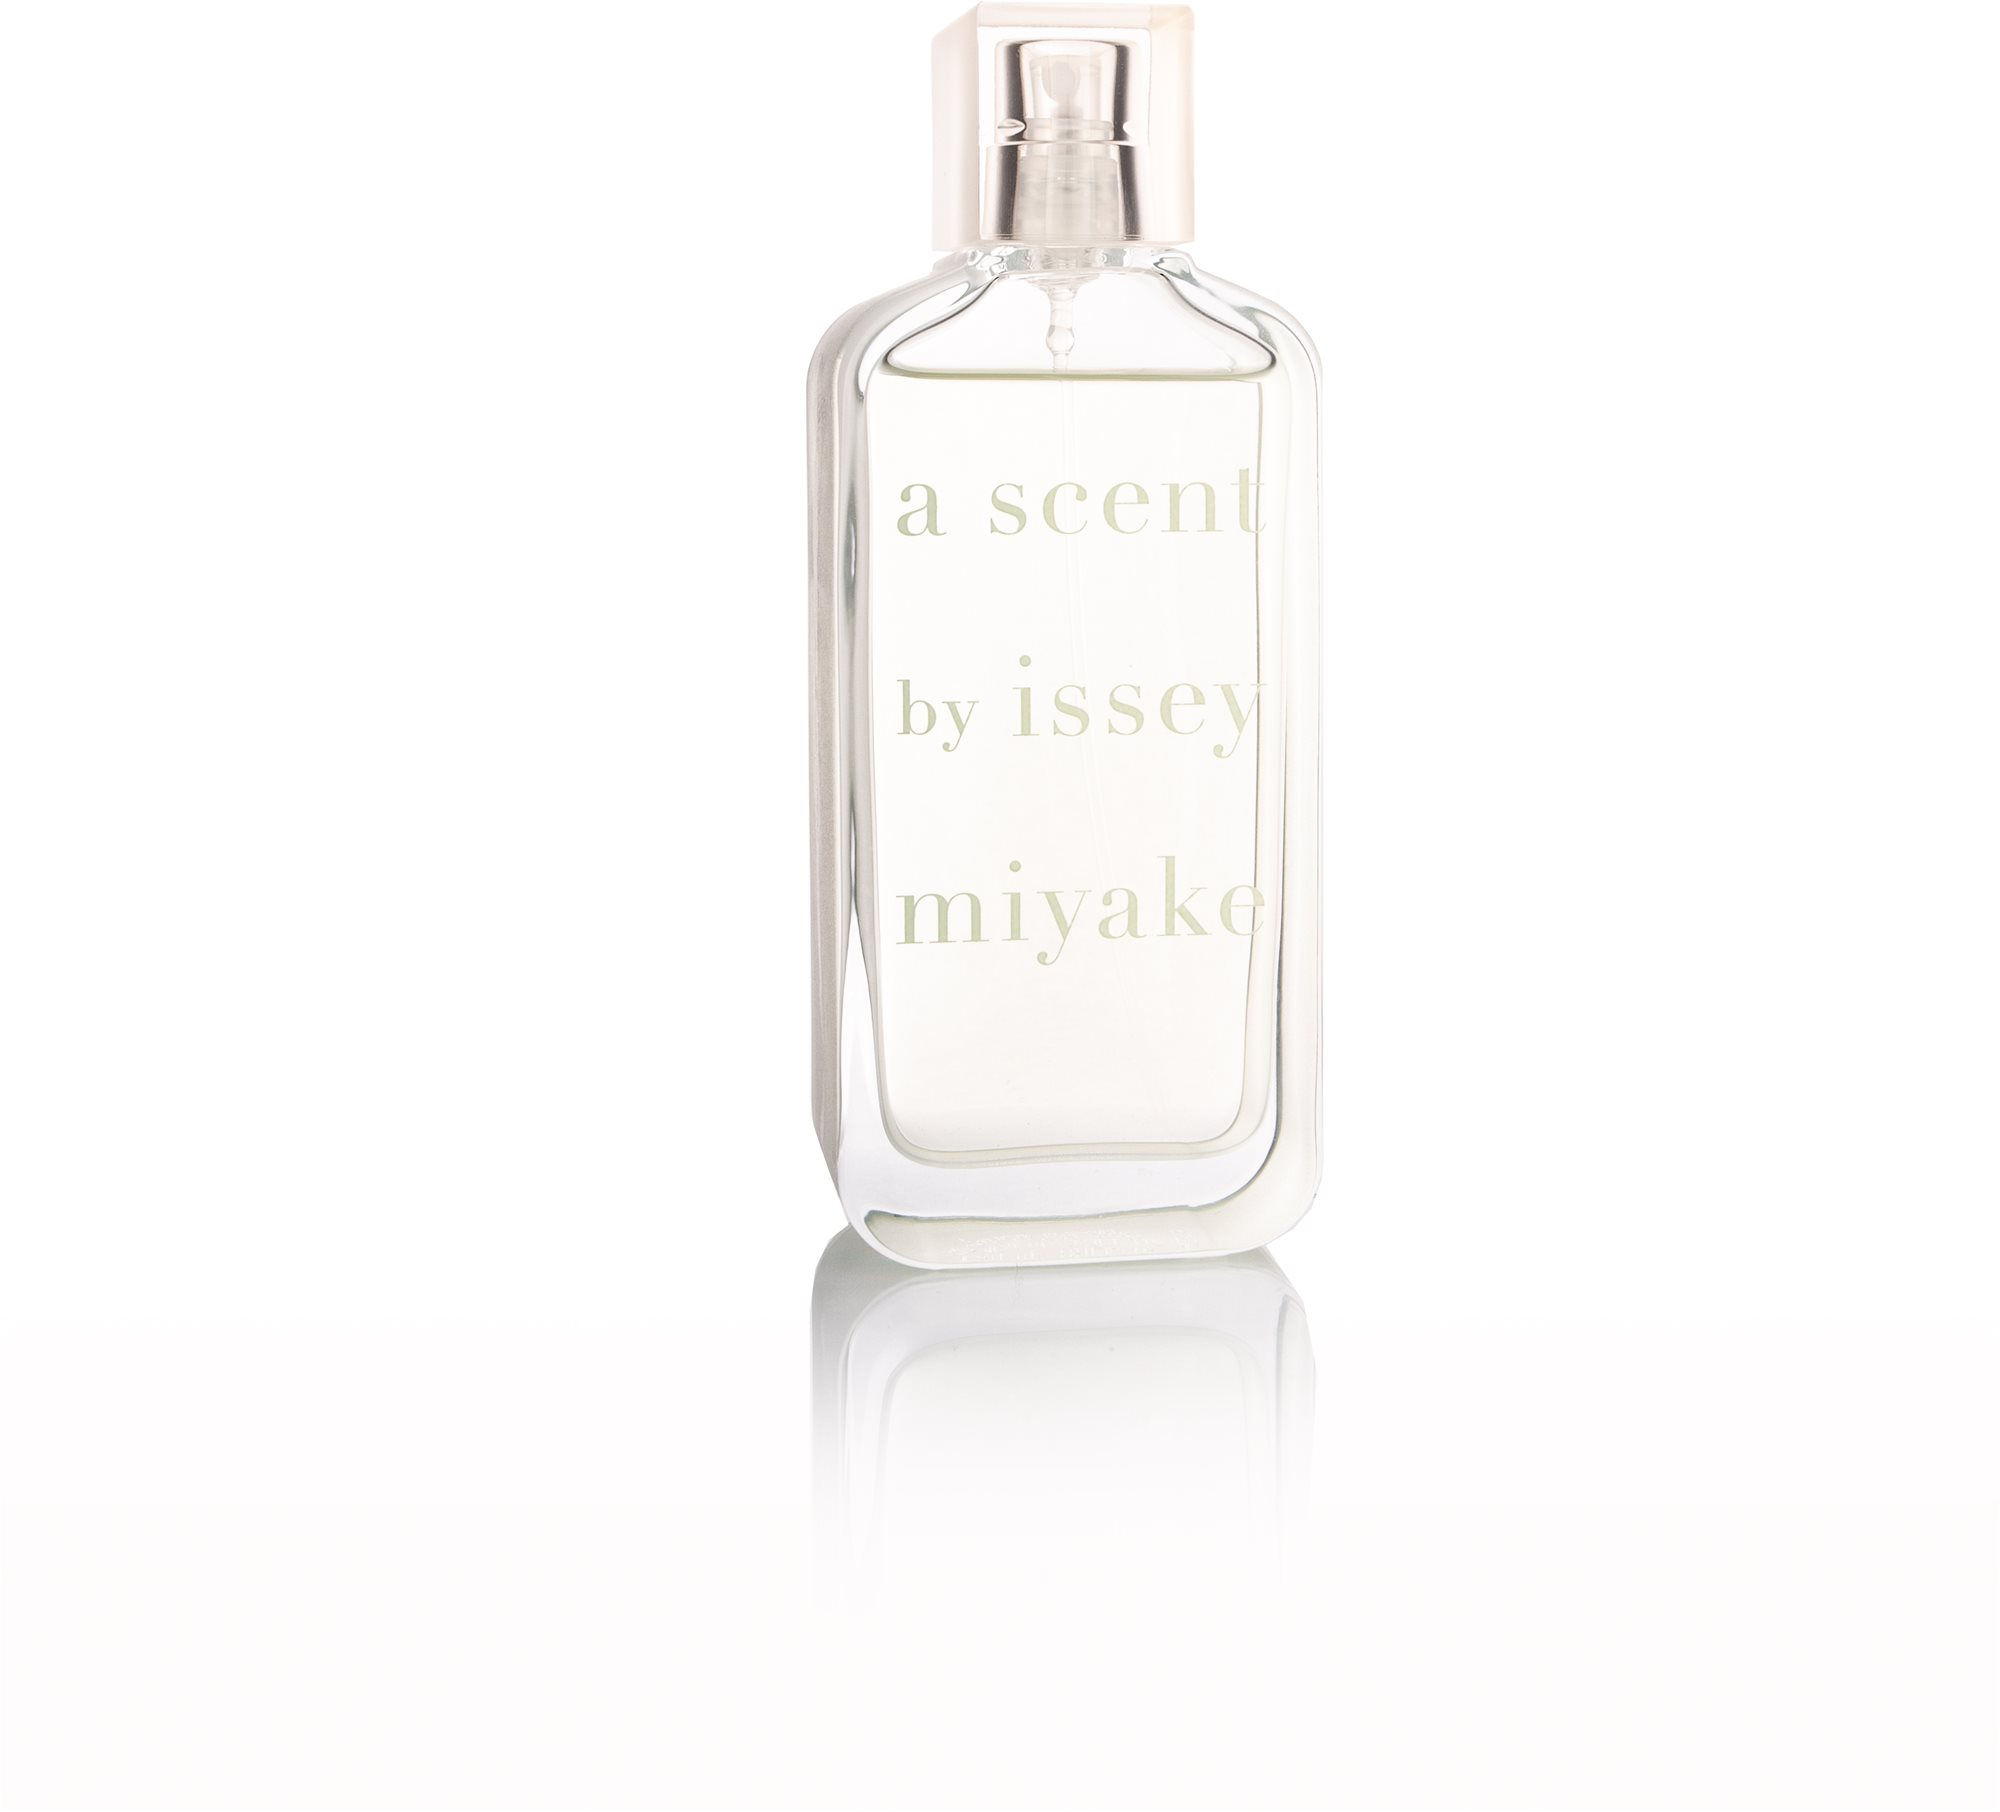 Eau de Toilette Issey Miyake A Scent by Issey Miyake 100 ml